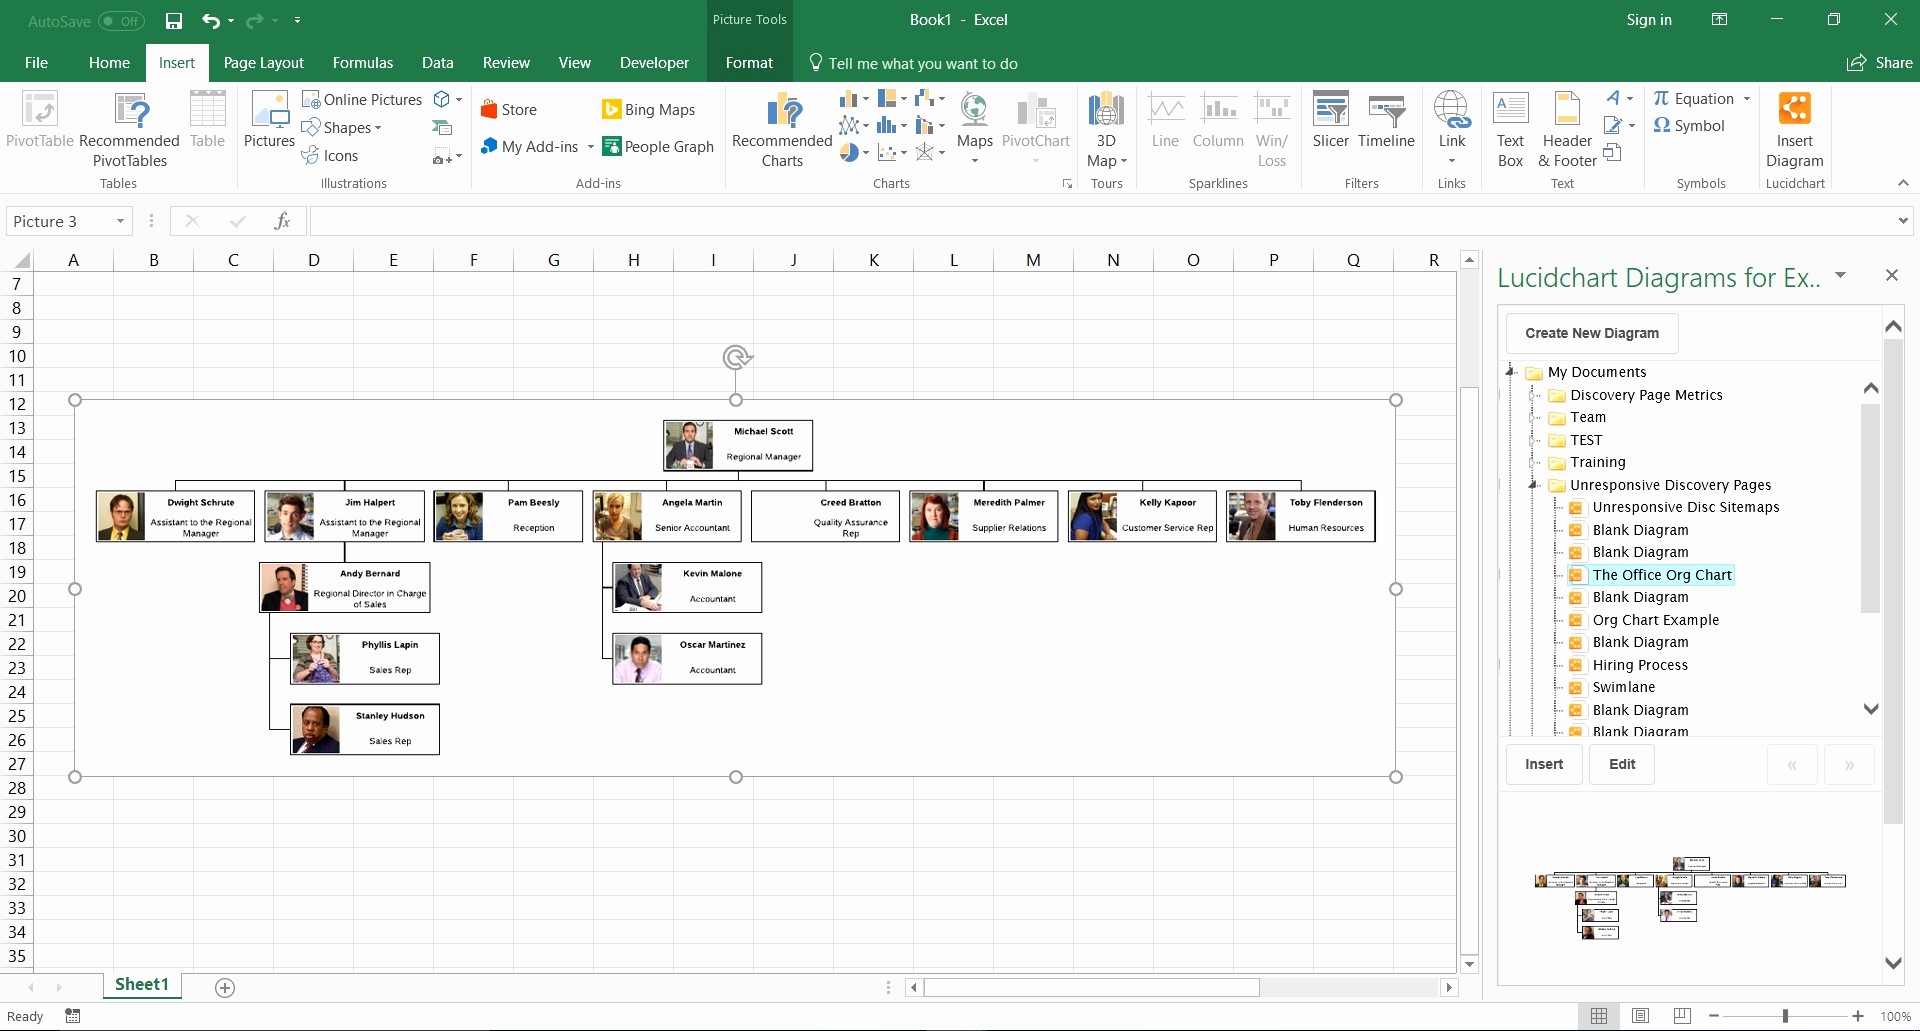 10 Generation Family Tree Excel Awesome Family Tree Spreadsheet Regarding Family Tree Spreadsheet